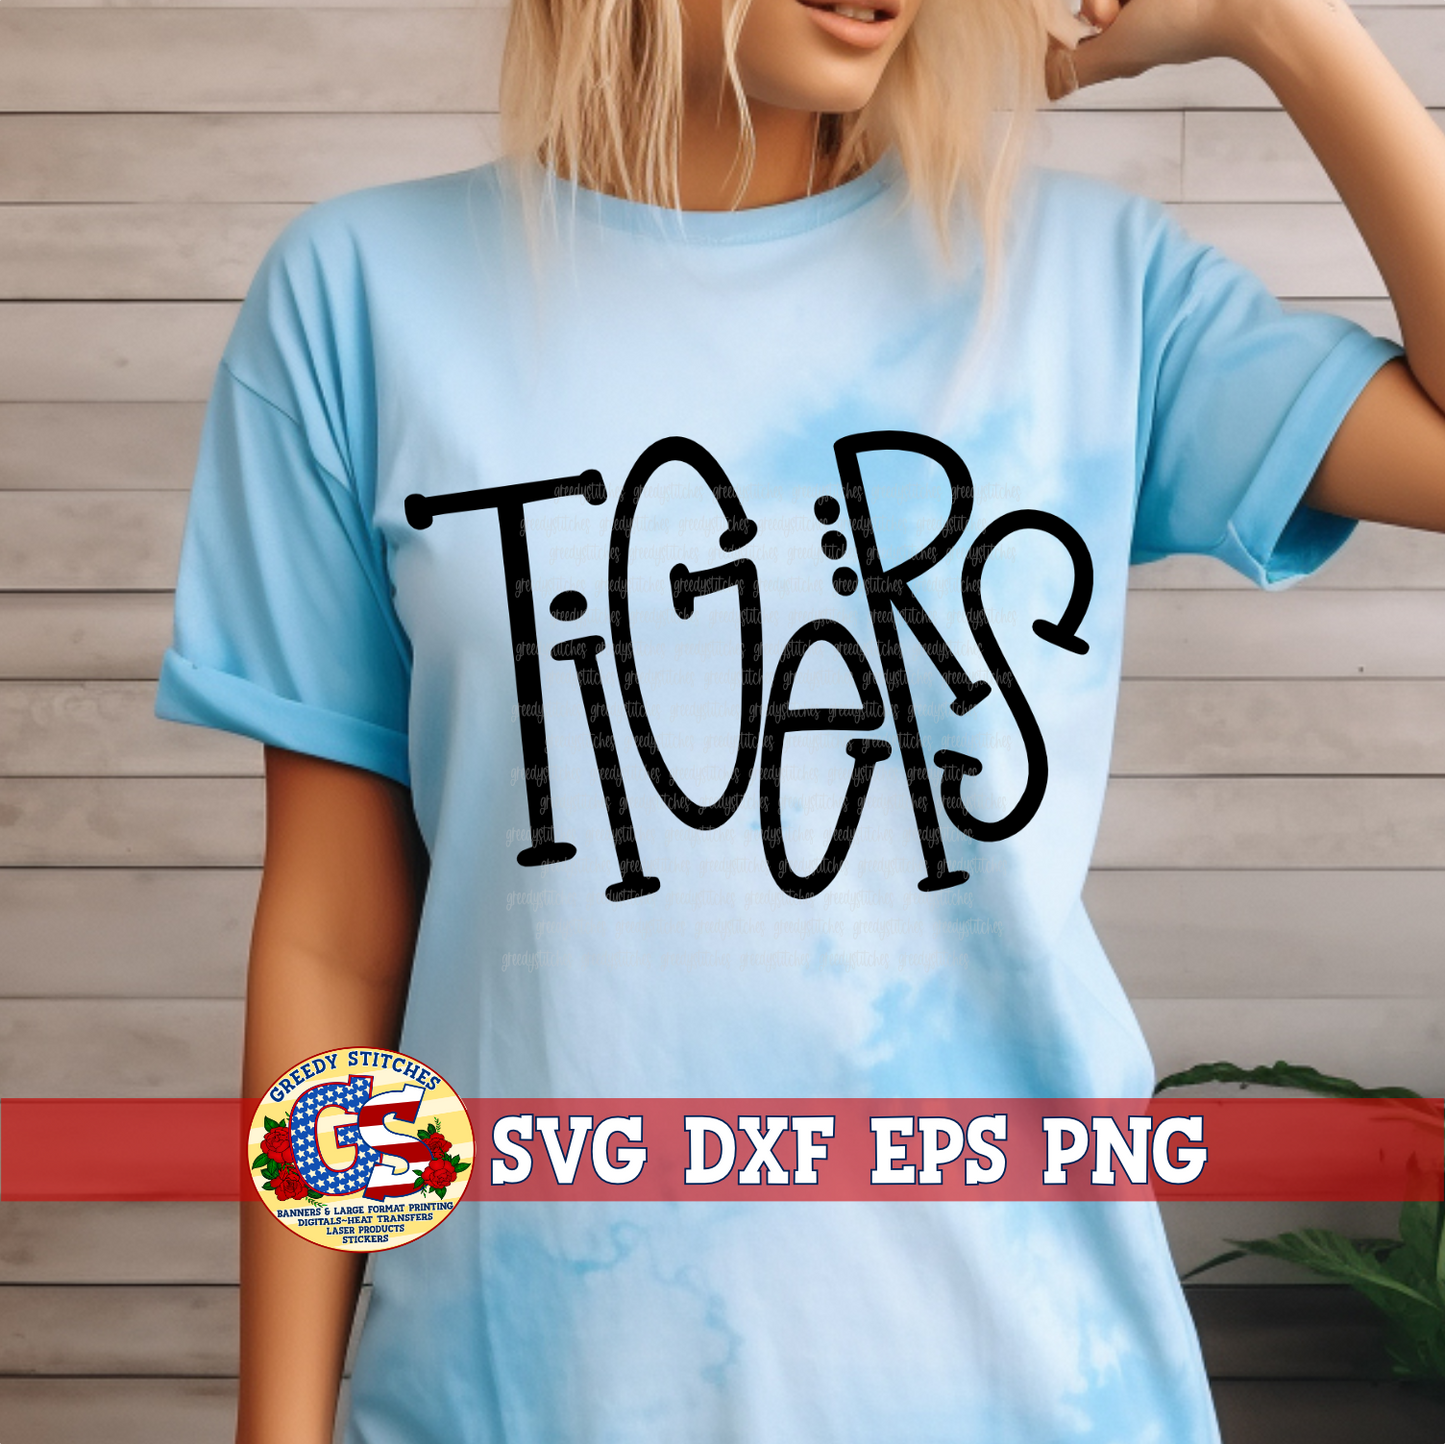 Tigers SVG DXF EPS PNG